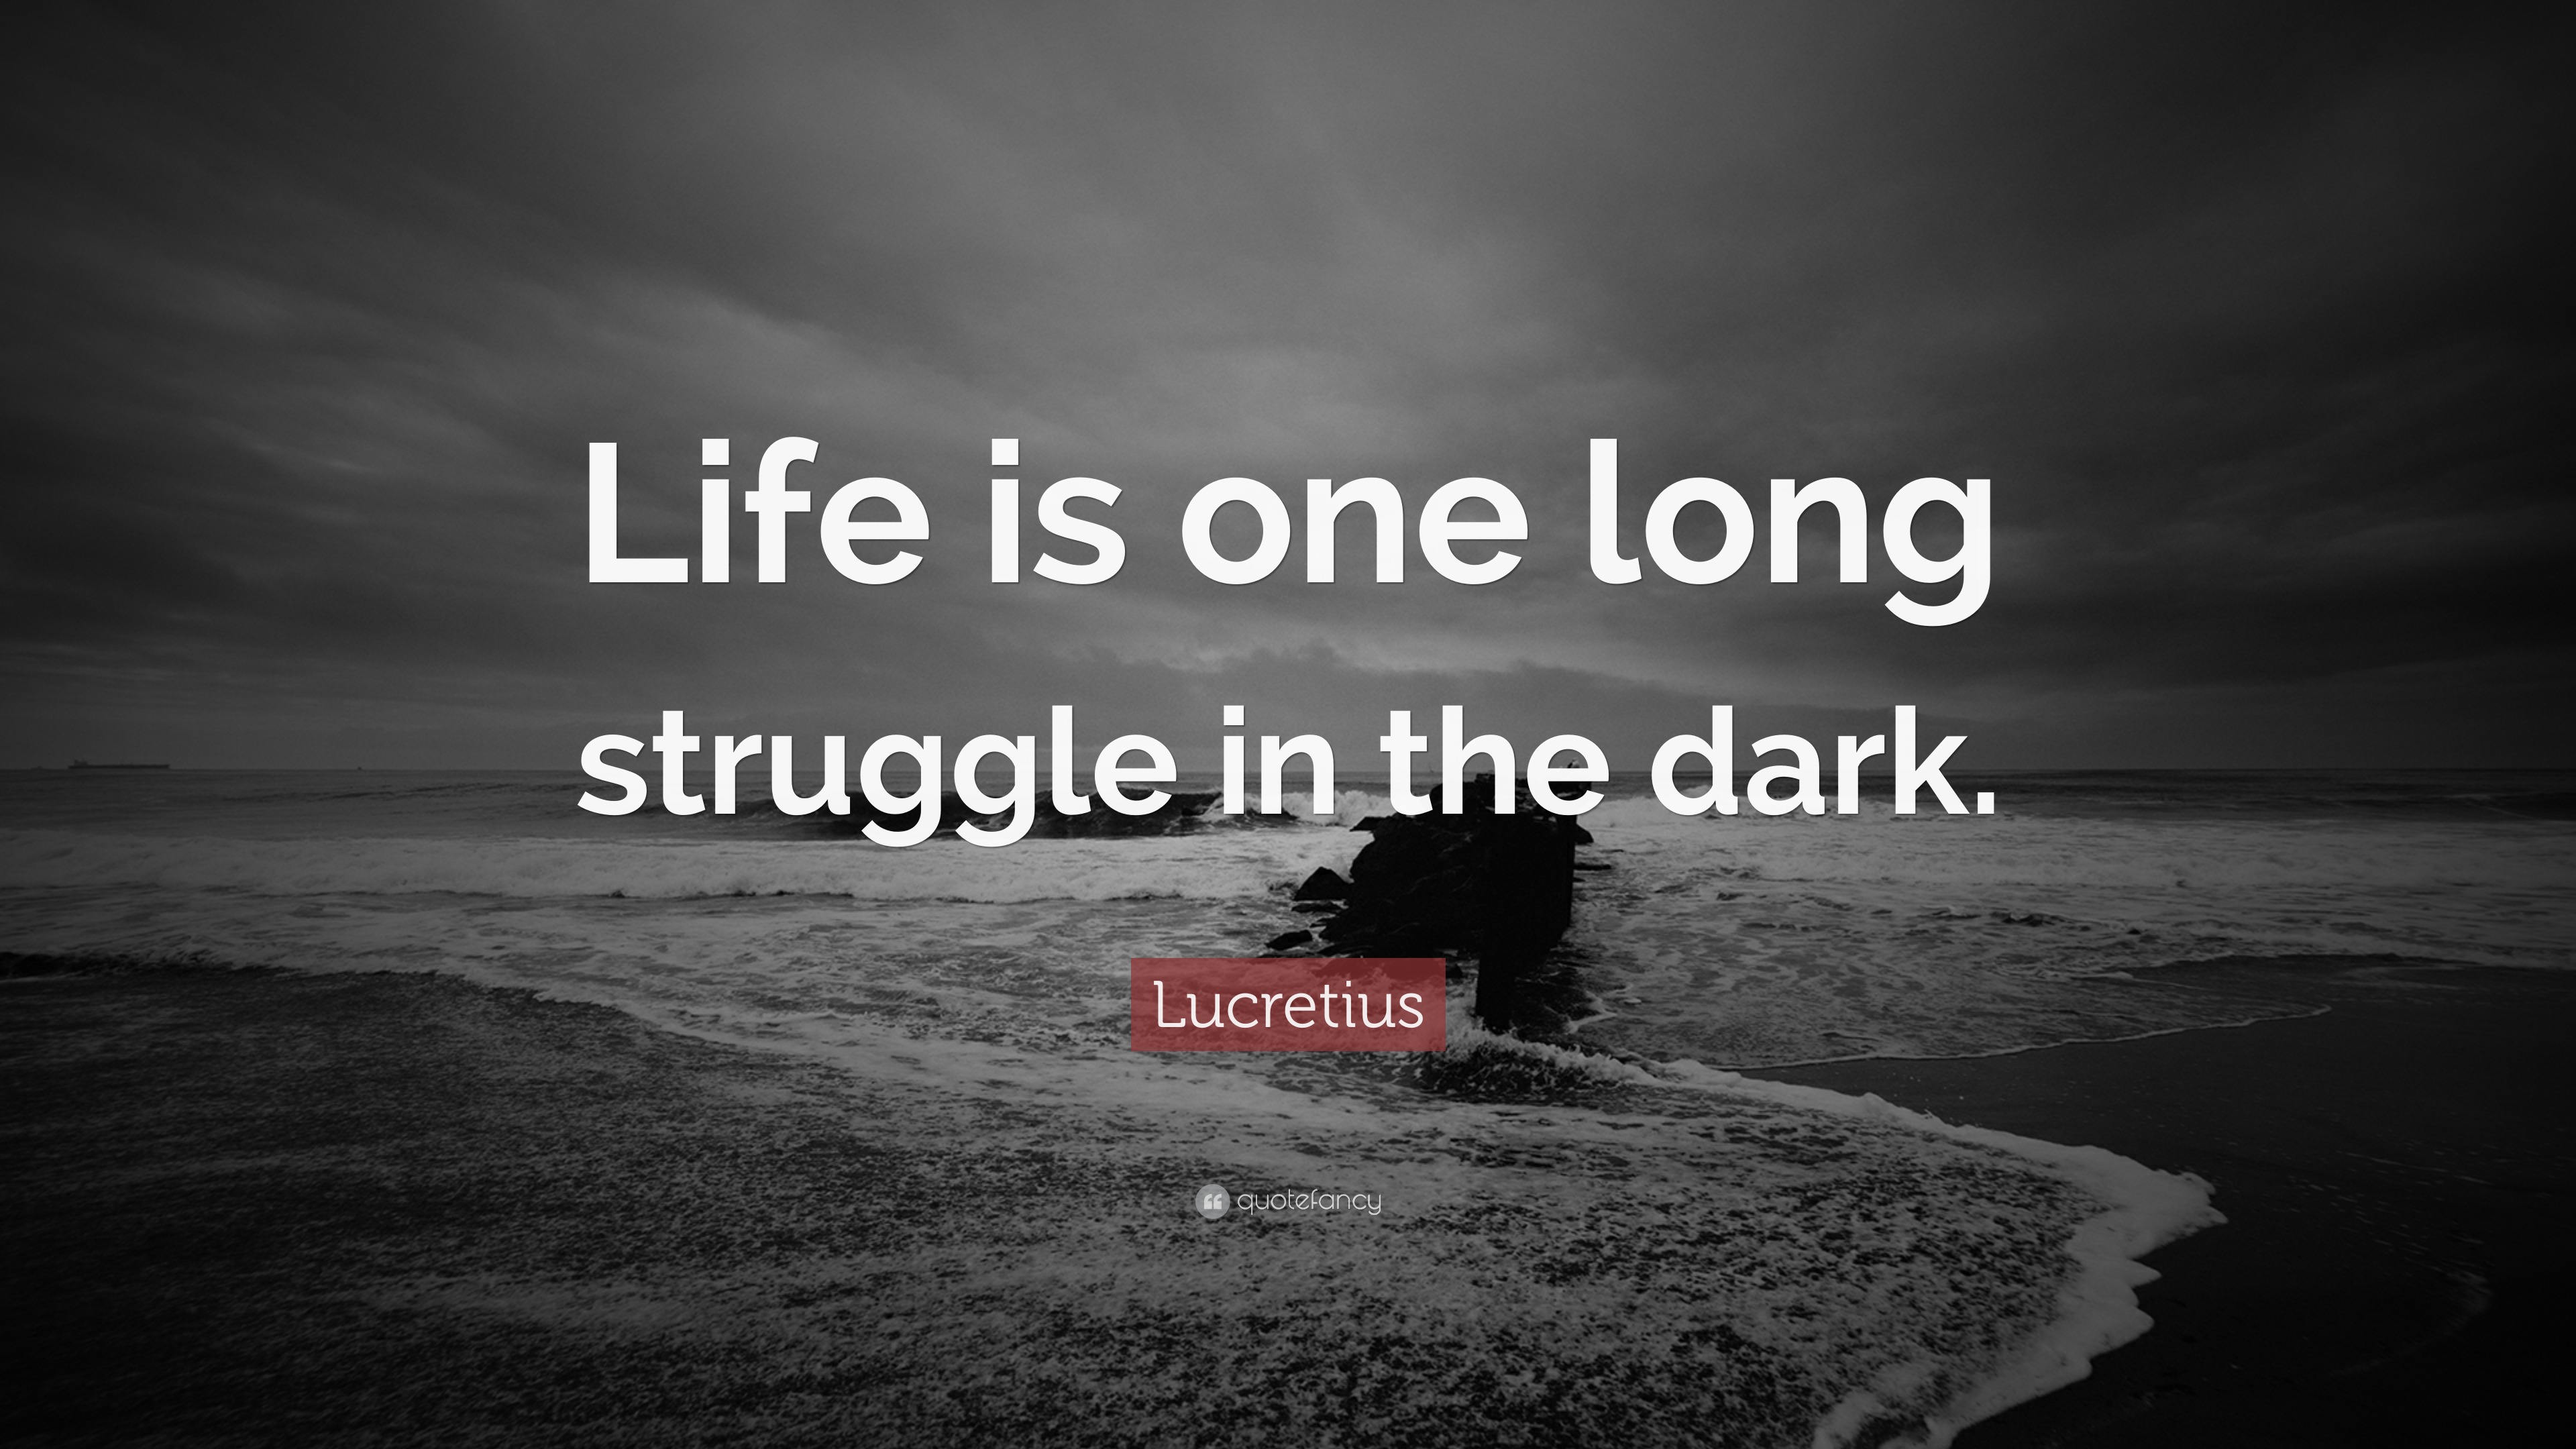 dark sayings about life